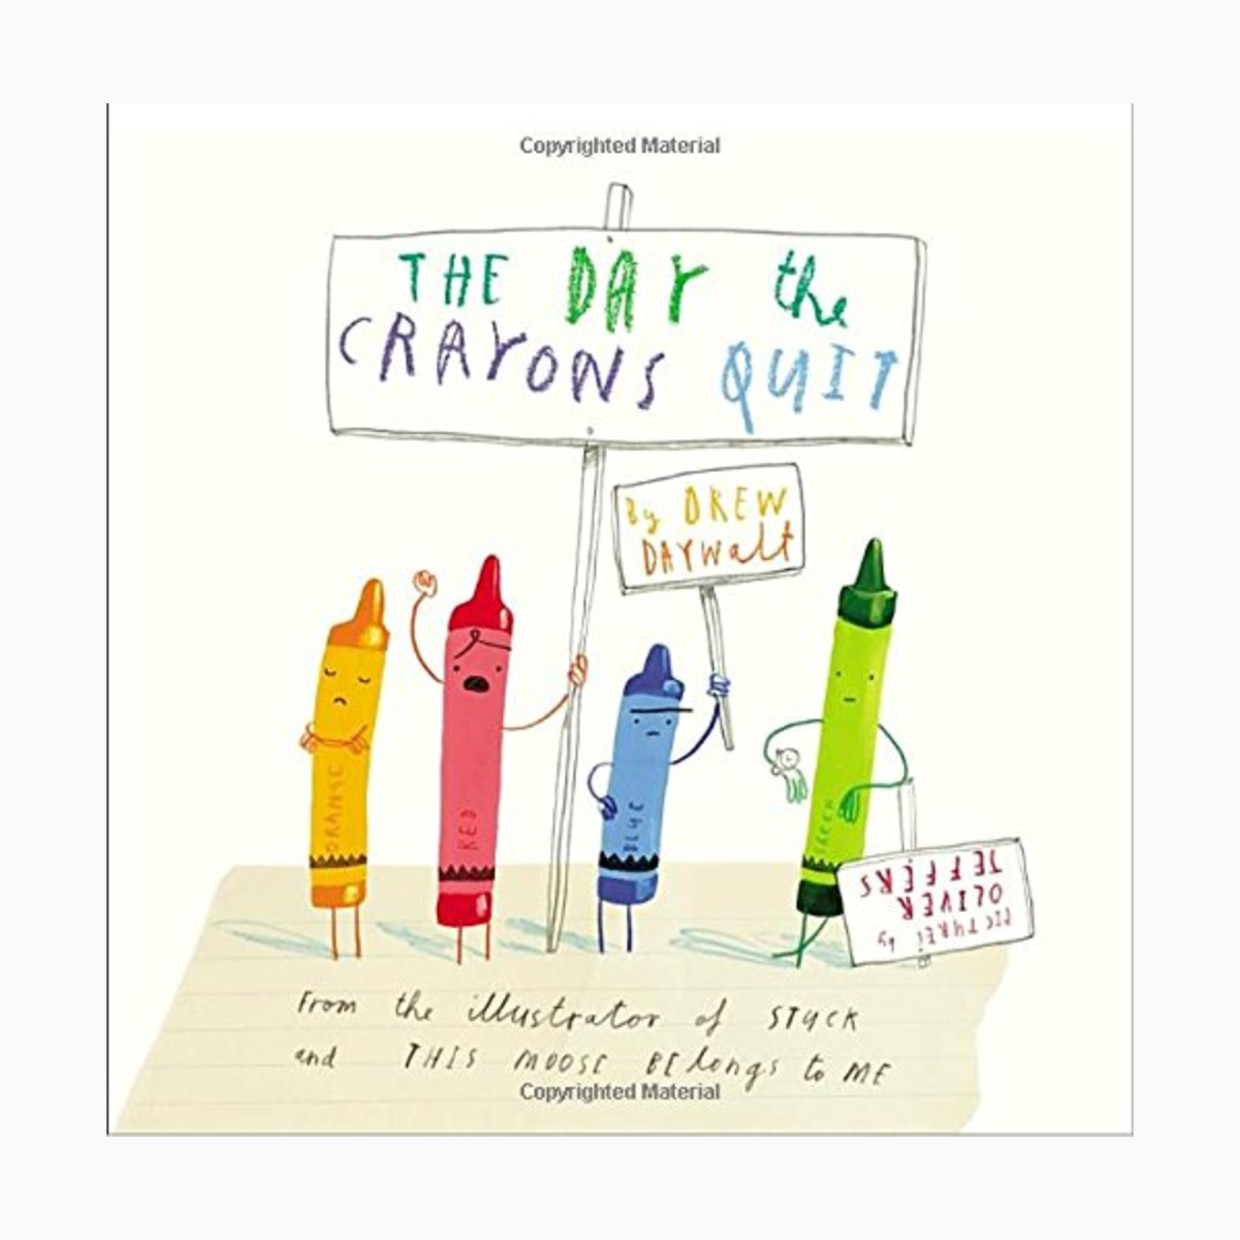 The Day the Crayons Quit.